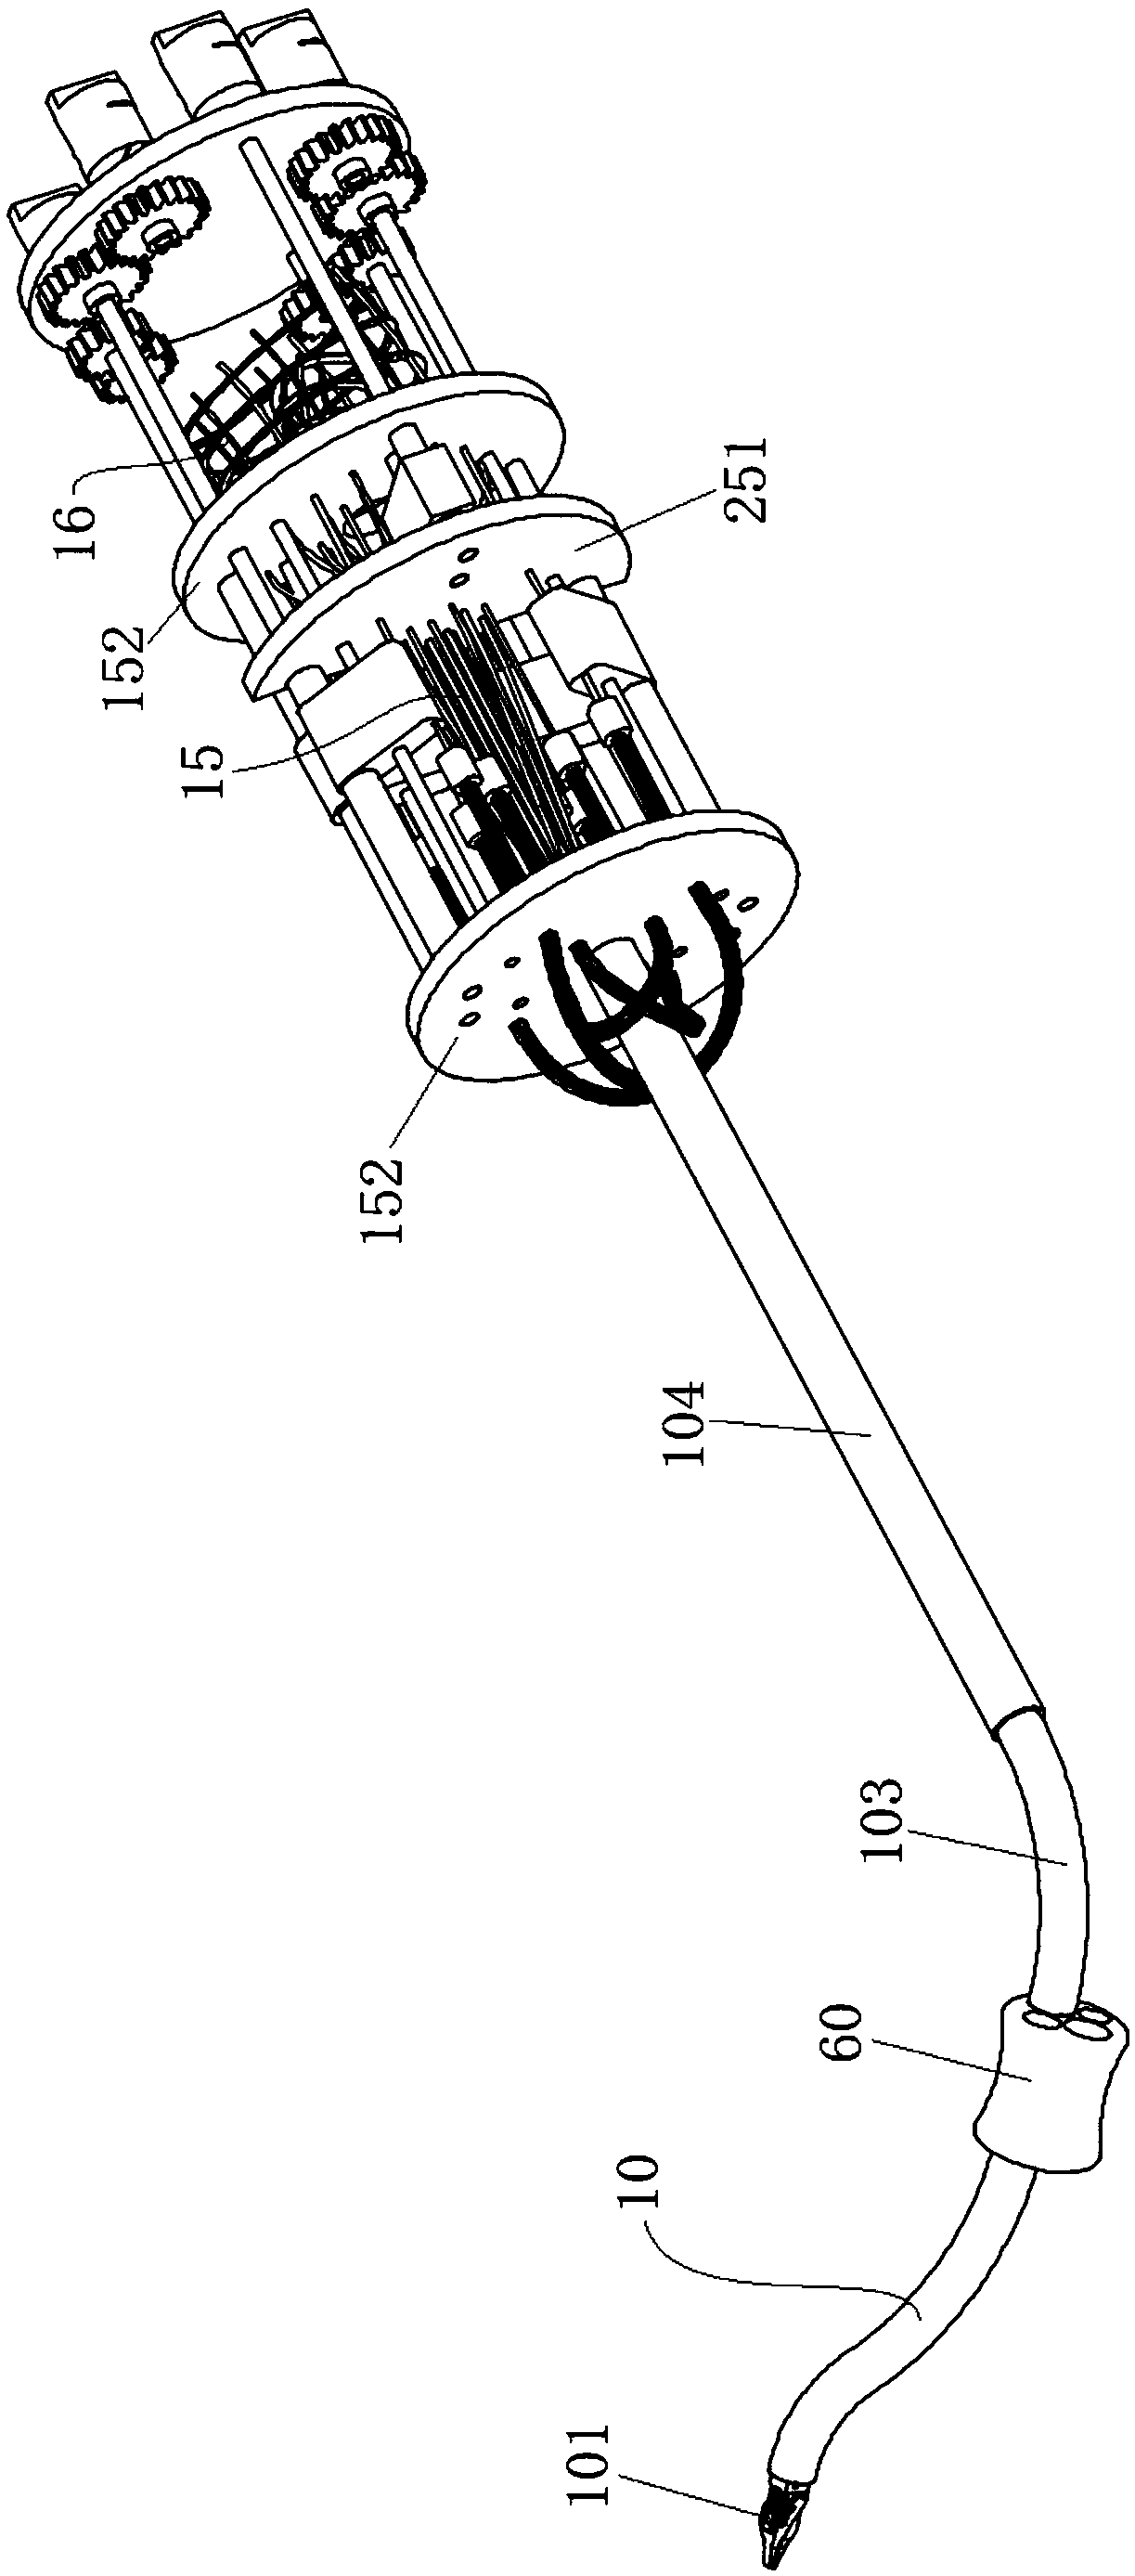 A flexible surgical tool system including a driver bone